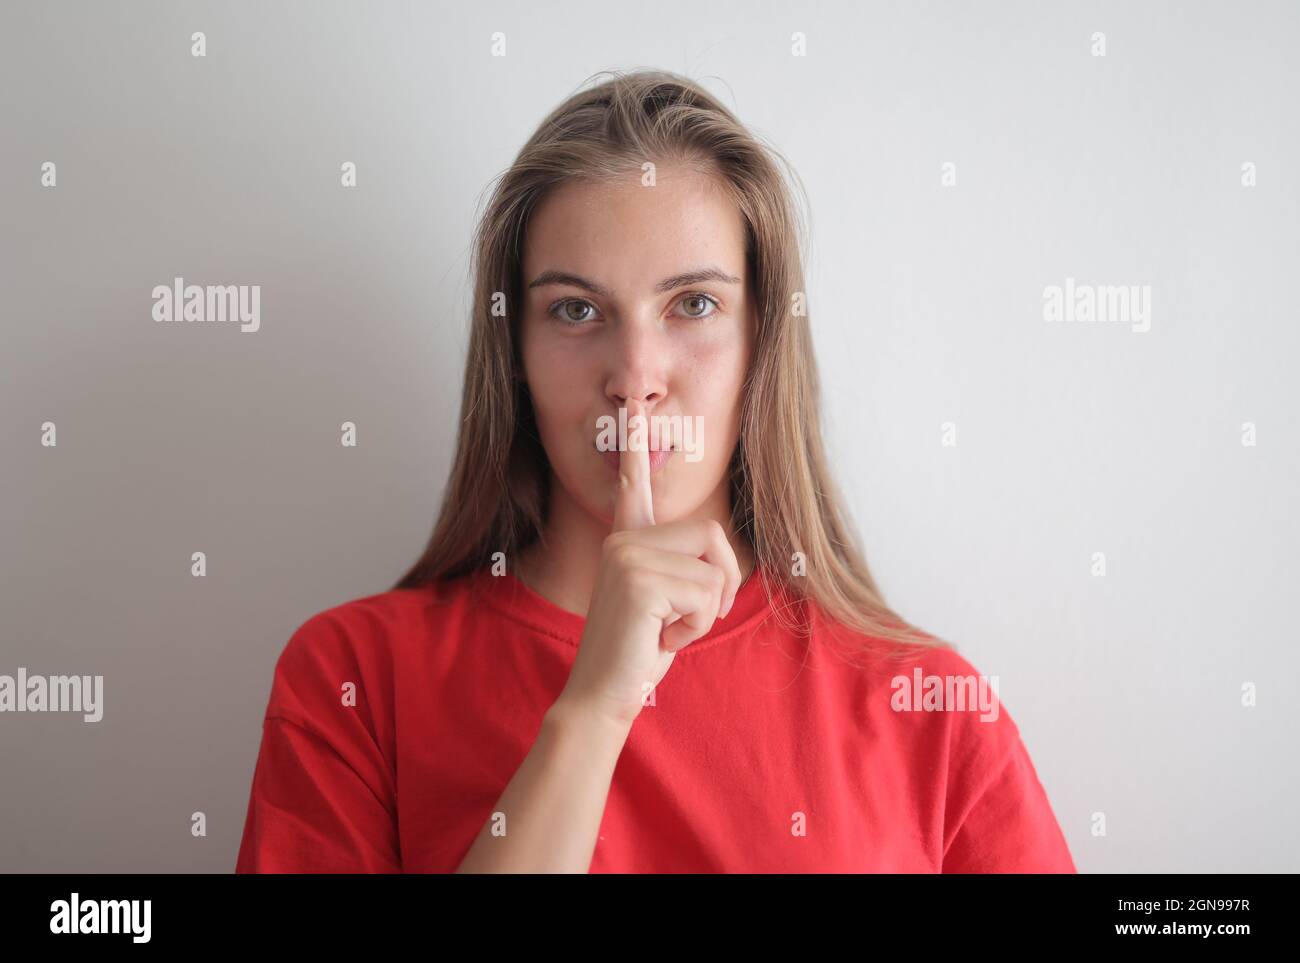 portrait of young woman with silence gesture Stock Photo